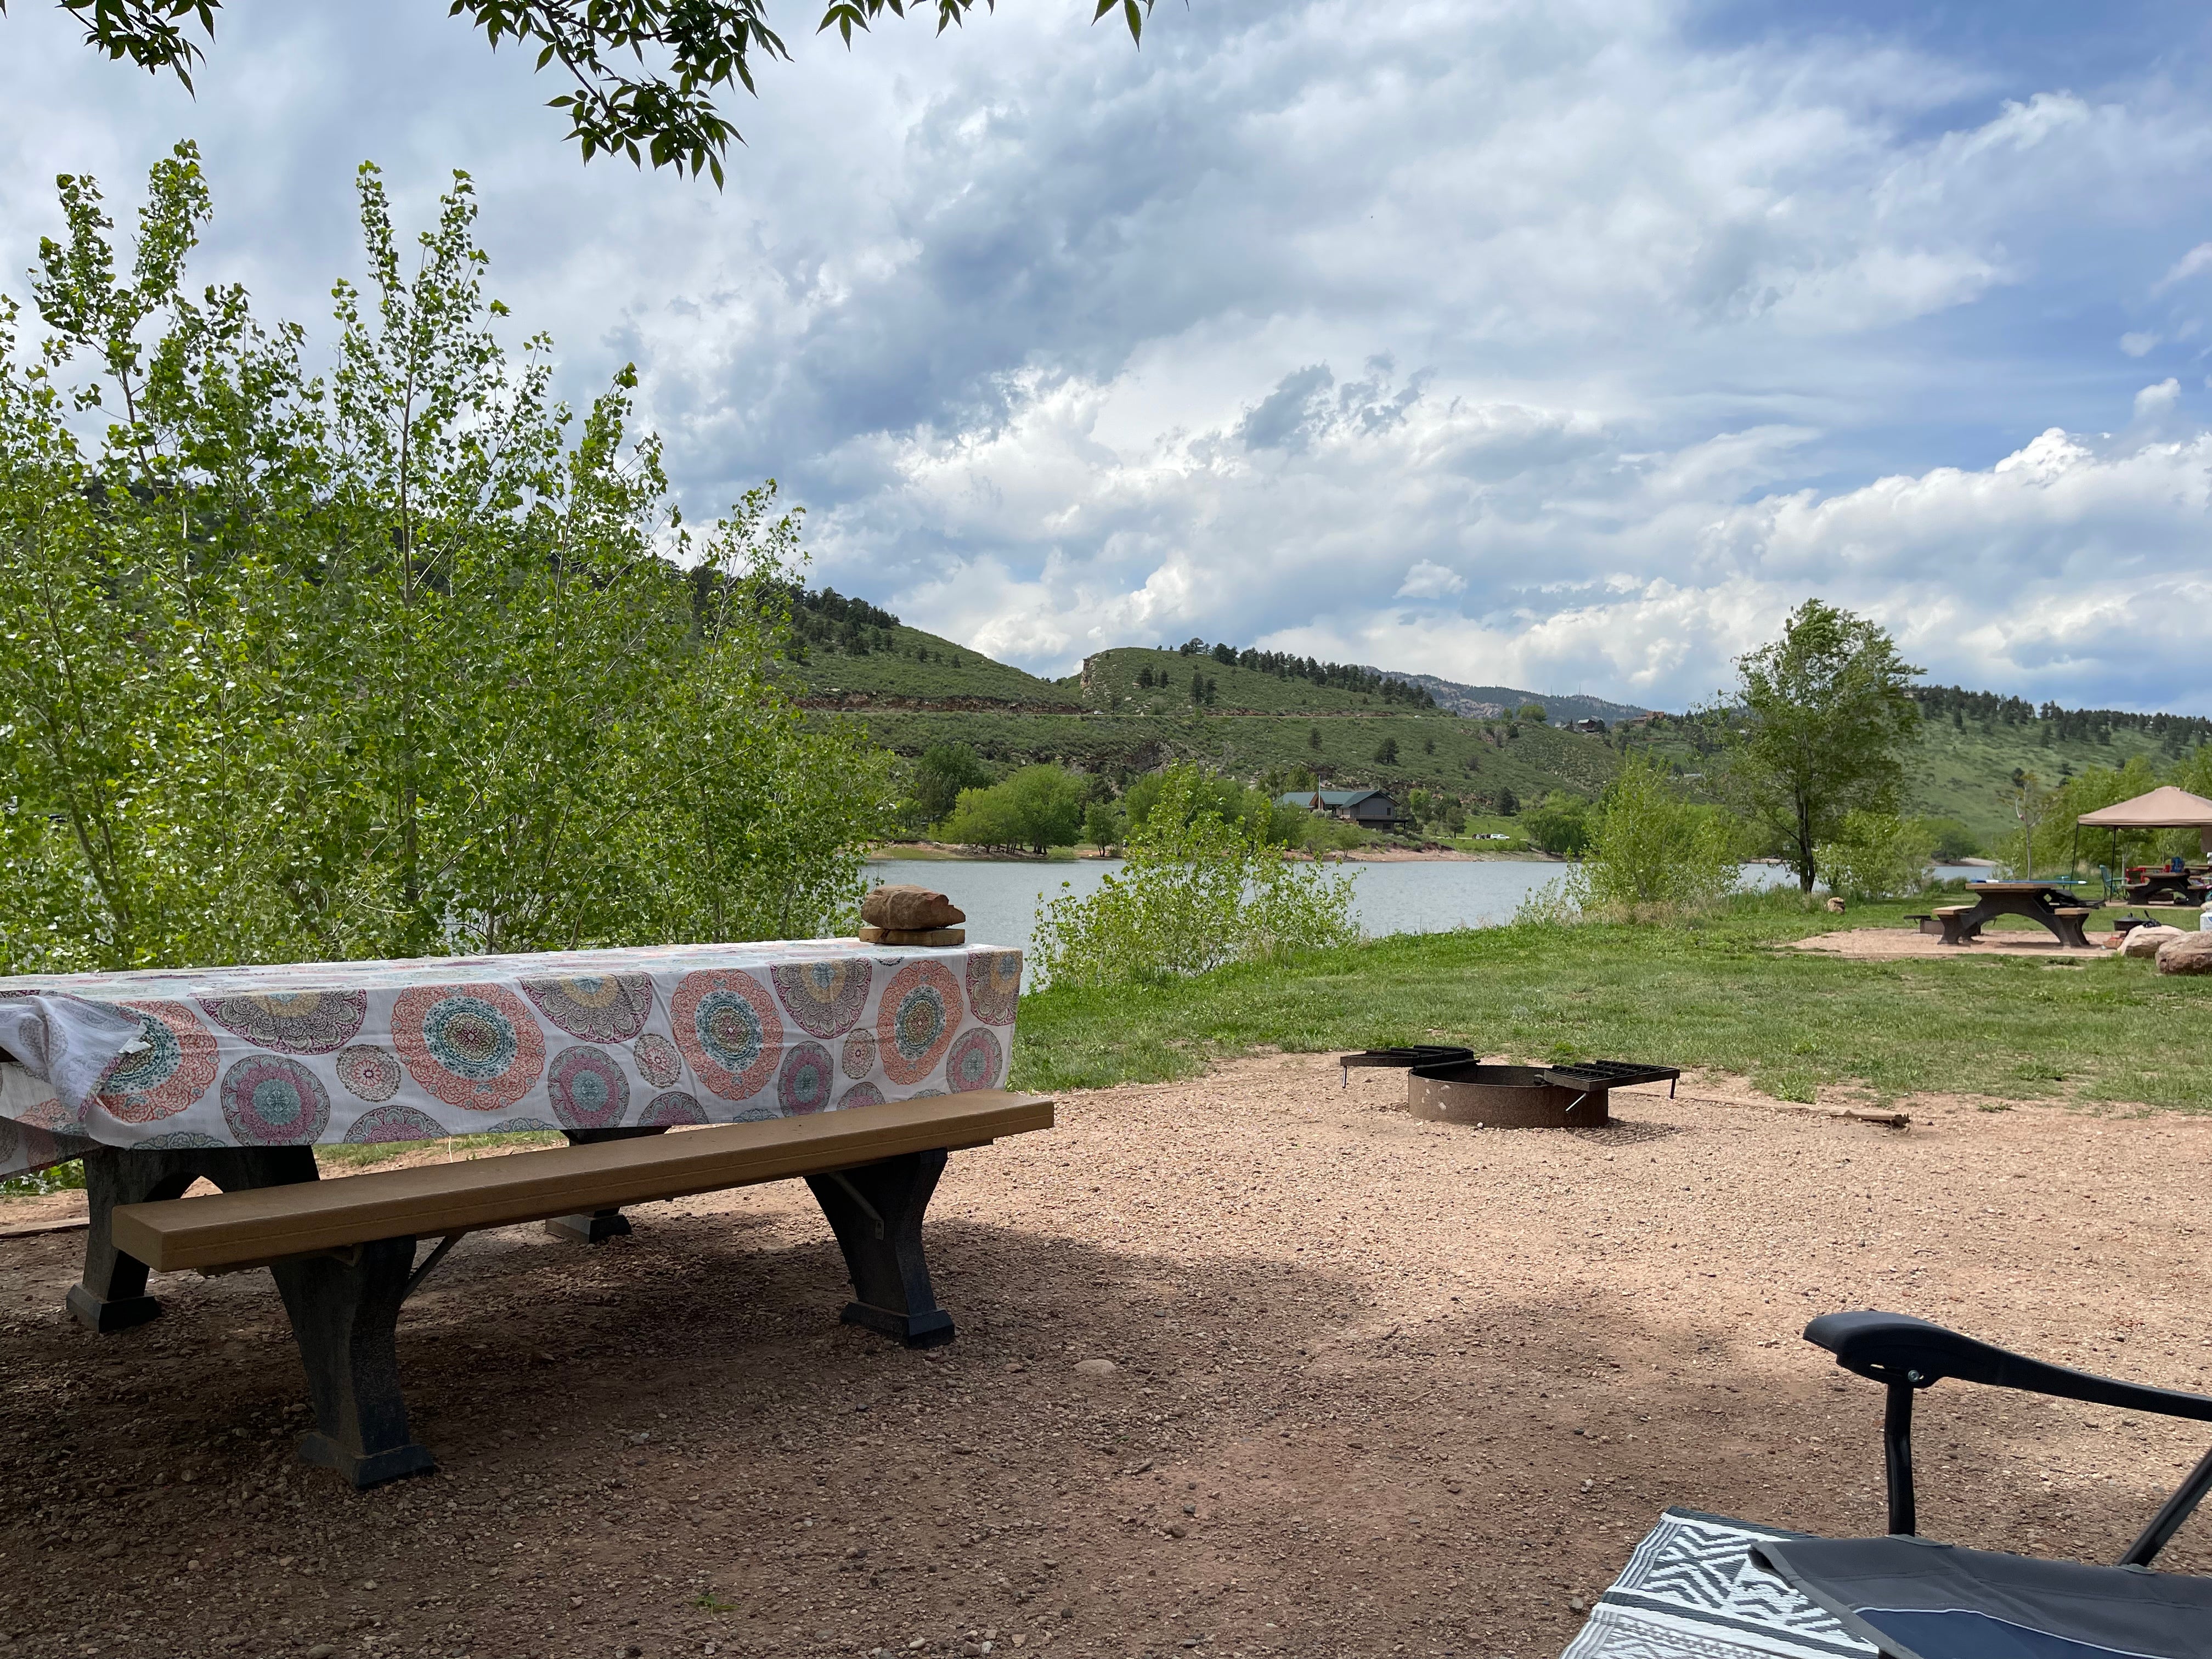 Camper submitted image from Horsetooth Reservoir County Park South Bay - 3